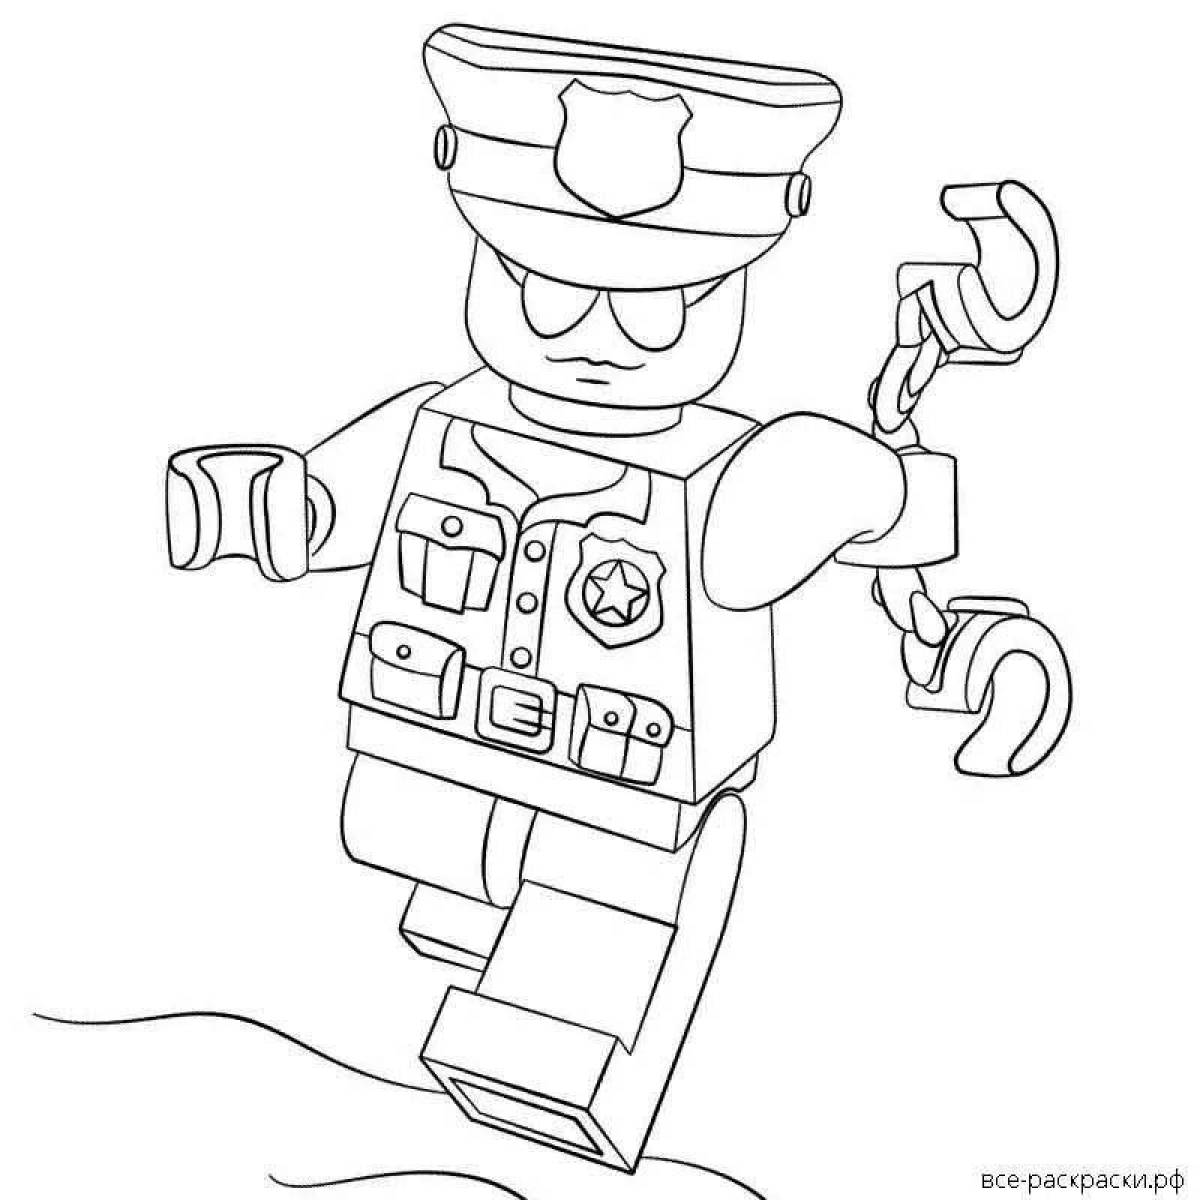 Great lego police coloring pages